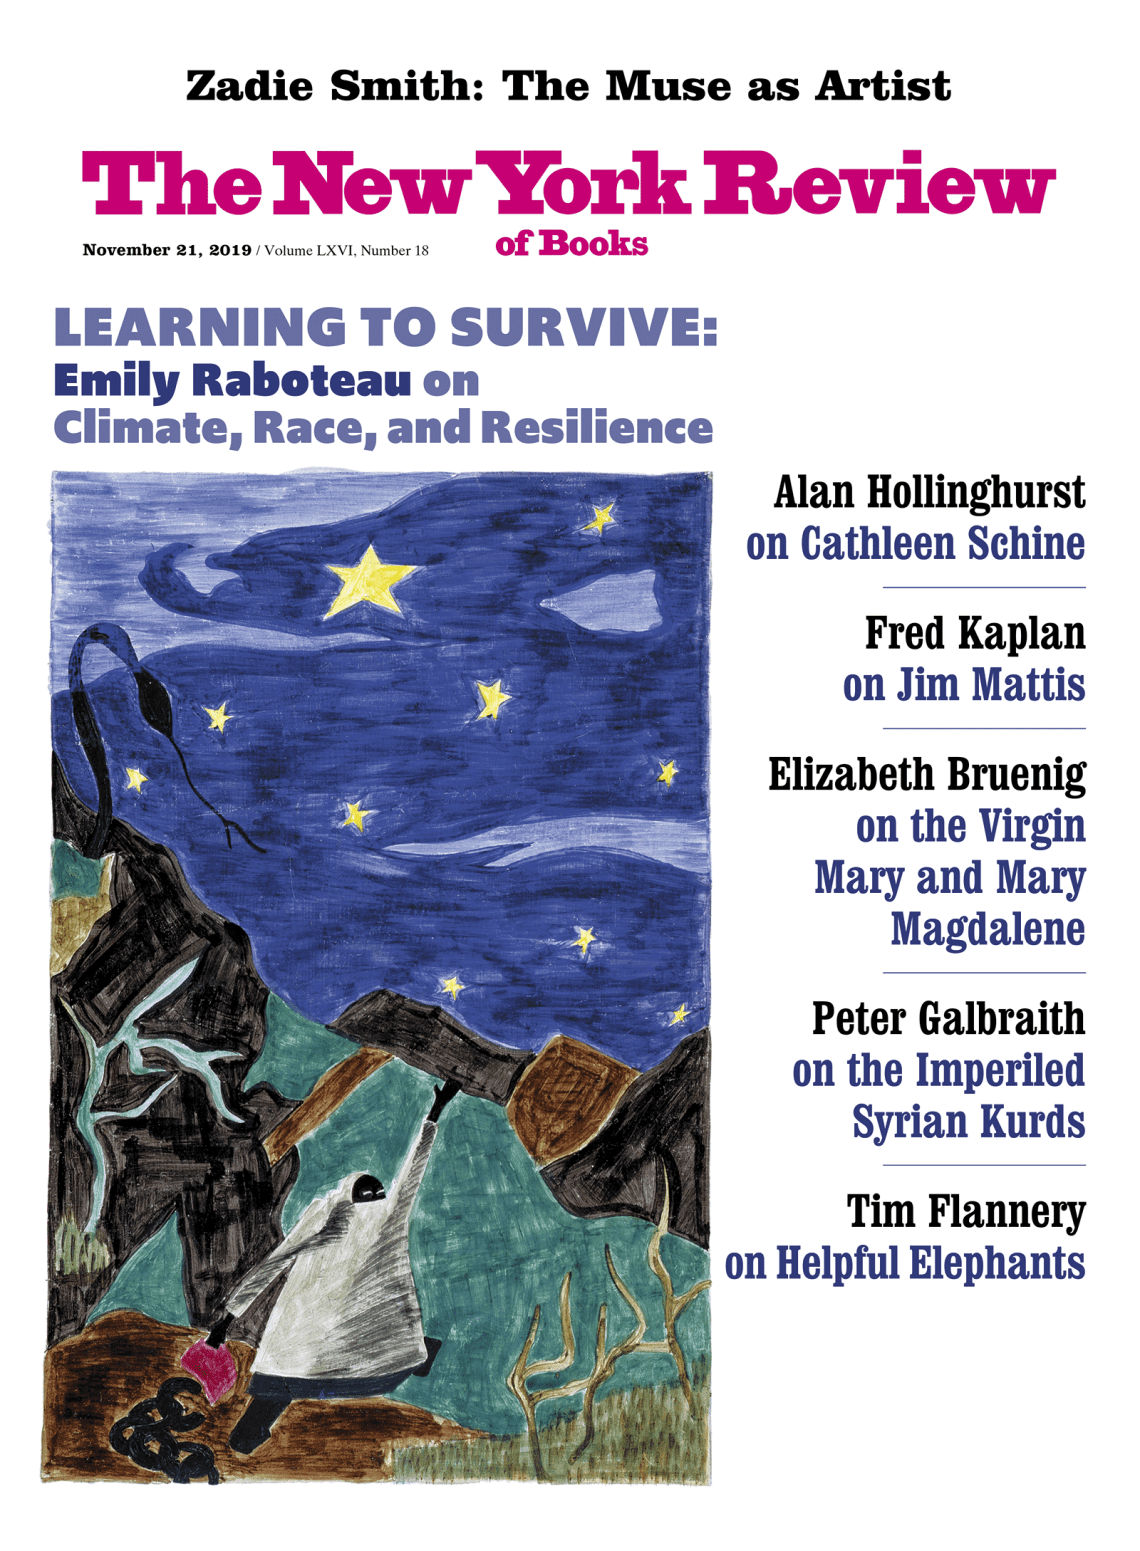 Image of the November 21, 2019 issue cover.